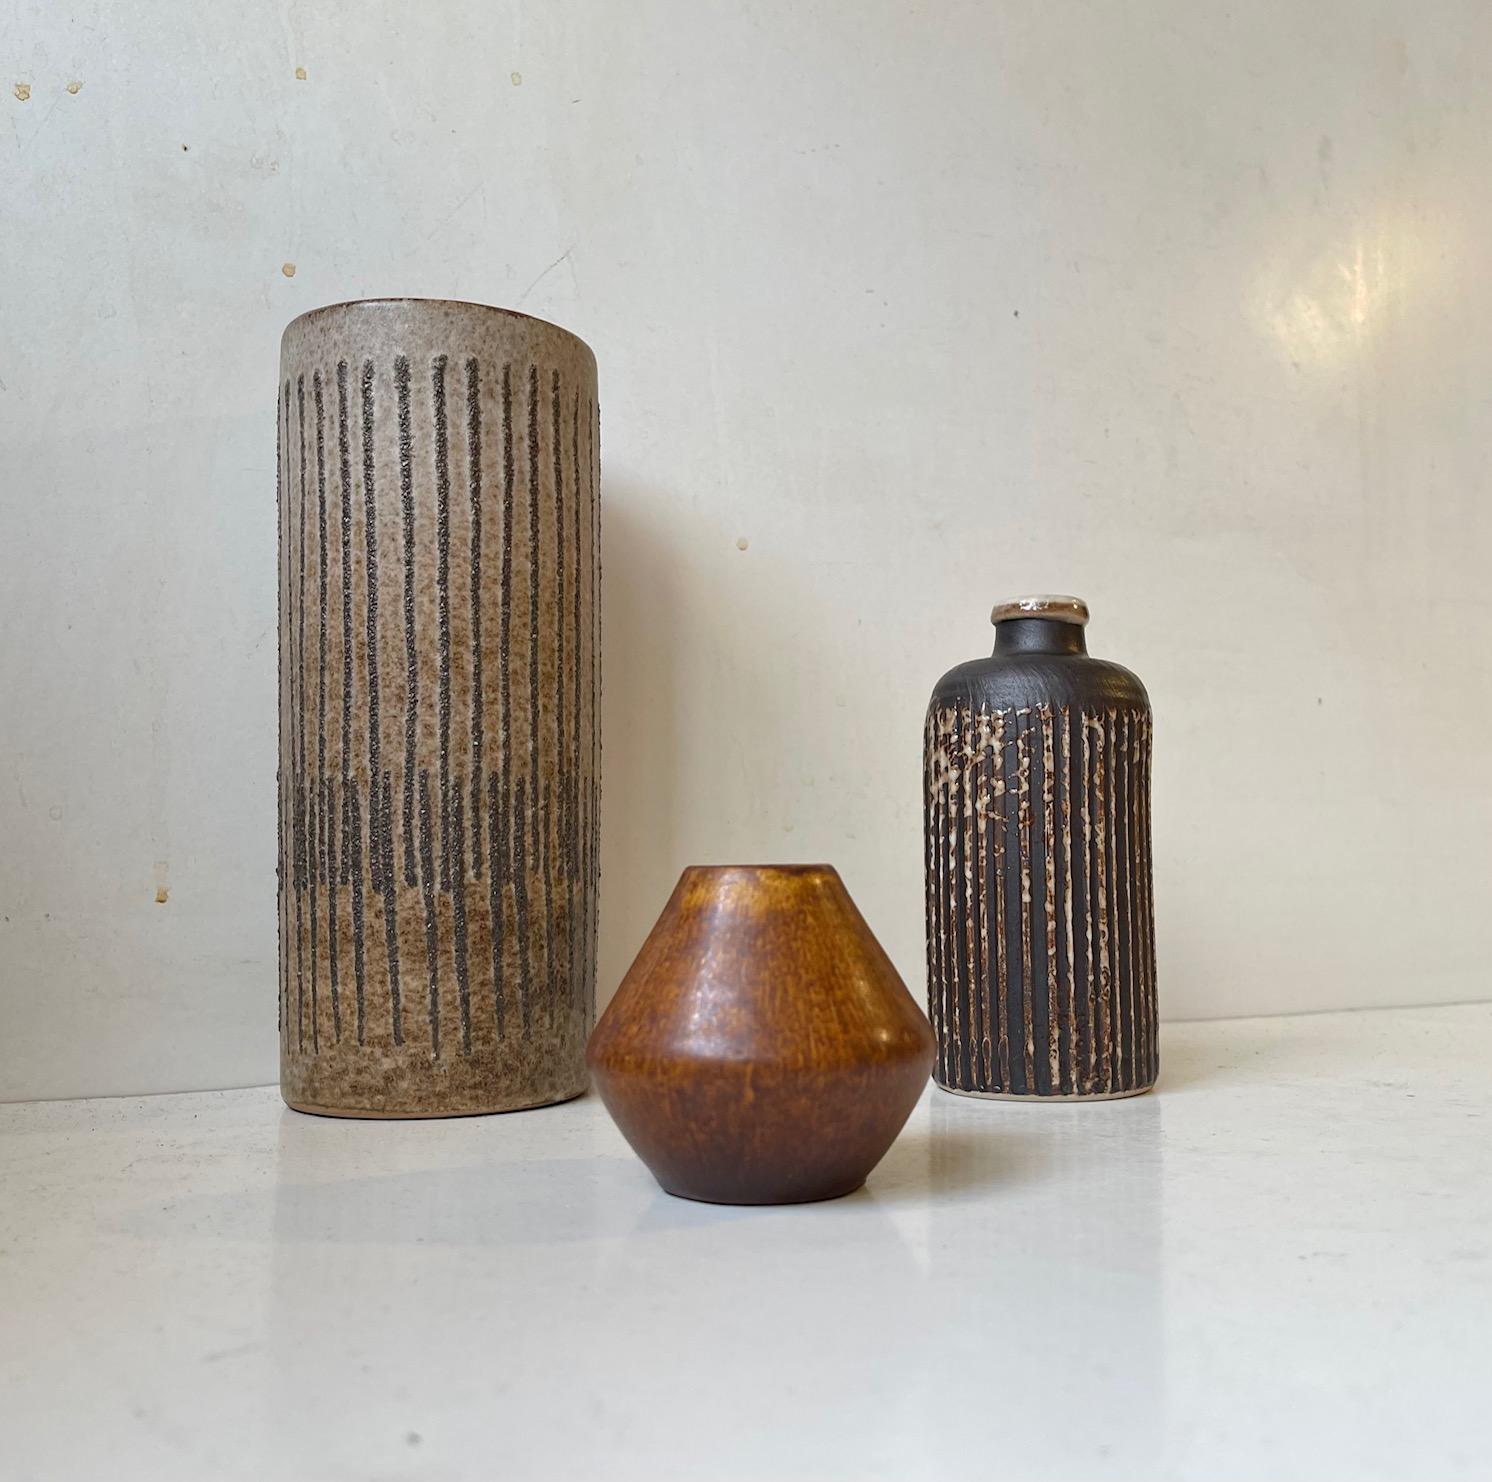 A Trio of curated Scandinavian stoneware vases in diffrent glazes. Unknown Scandinavian makers in the style of Saxbo, Knabstrup and Søholm. Measurements: H: 21/14/6.3 cm. The price is for the set of 3.